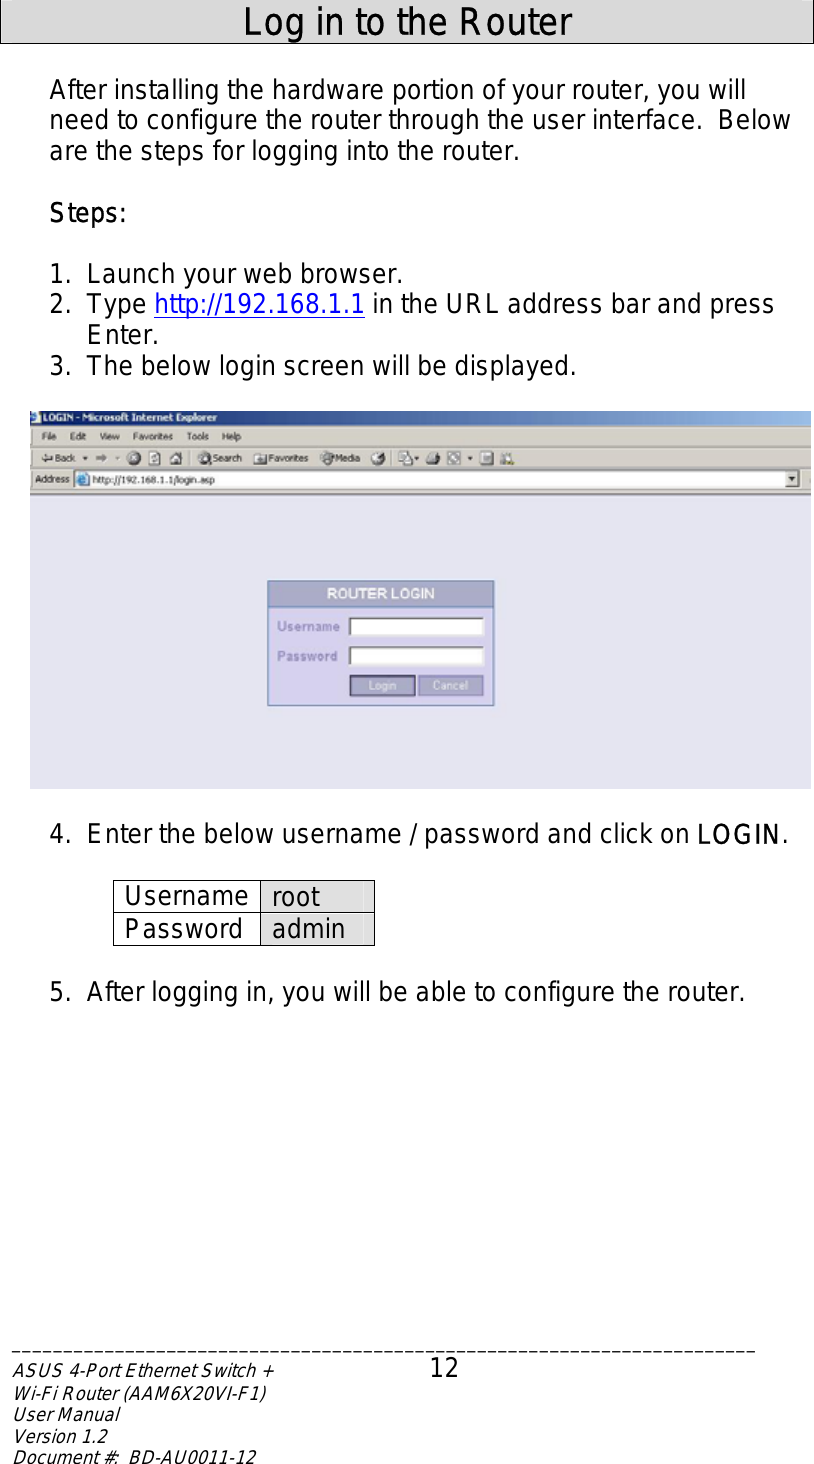   Log in to the Router  After installing the hardware portion of your router, you will need to configure the router through the user interface.  Below are the steps for logging into the router.    Steps:  1.  Launch your web browser. 2. Type http://192.168.1.1 in the URL address bar and press Enter. 3.  The below login screen will be displayed.    4.  Enter the below username / password and click on LOGIN.  Username  root Password  admin  5.  After logging in, you will be able to configure the router. ________________________________________________________________________ASUS 4-Port Ethernet Switch +  12 Wi-Fi Router (AAM6X20VI-F1) User Manual                                                                         Version 1.2 Document #:  BD-AU0011-12  